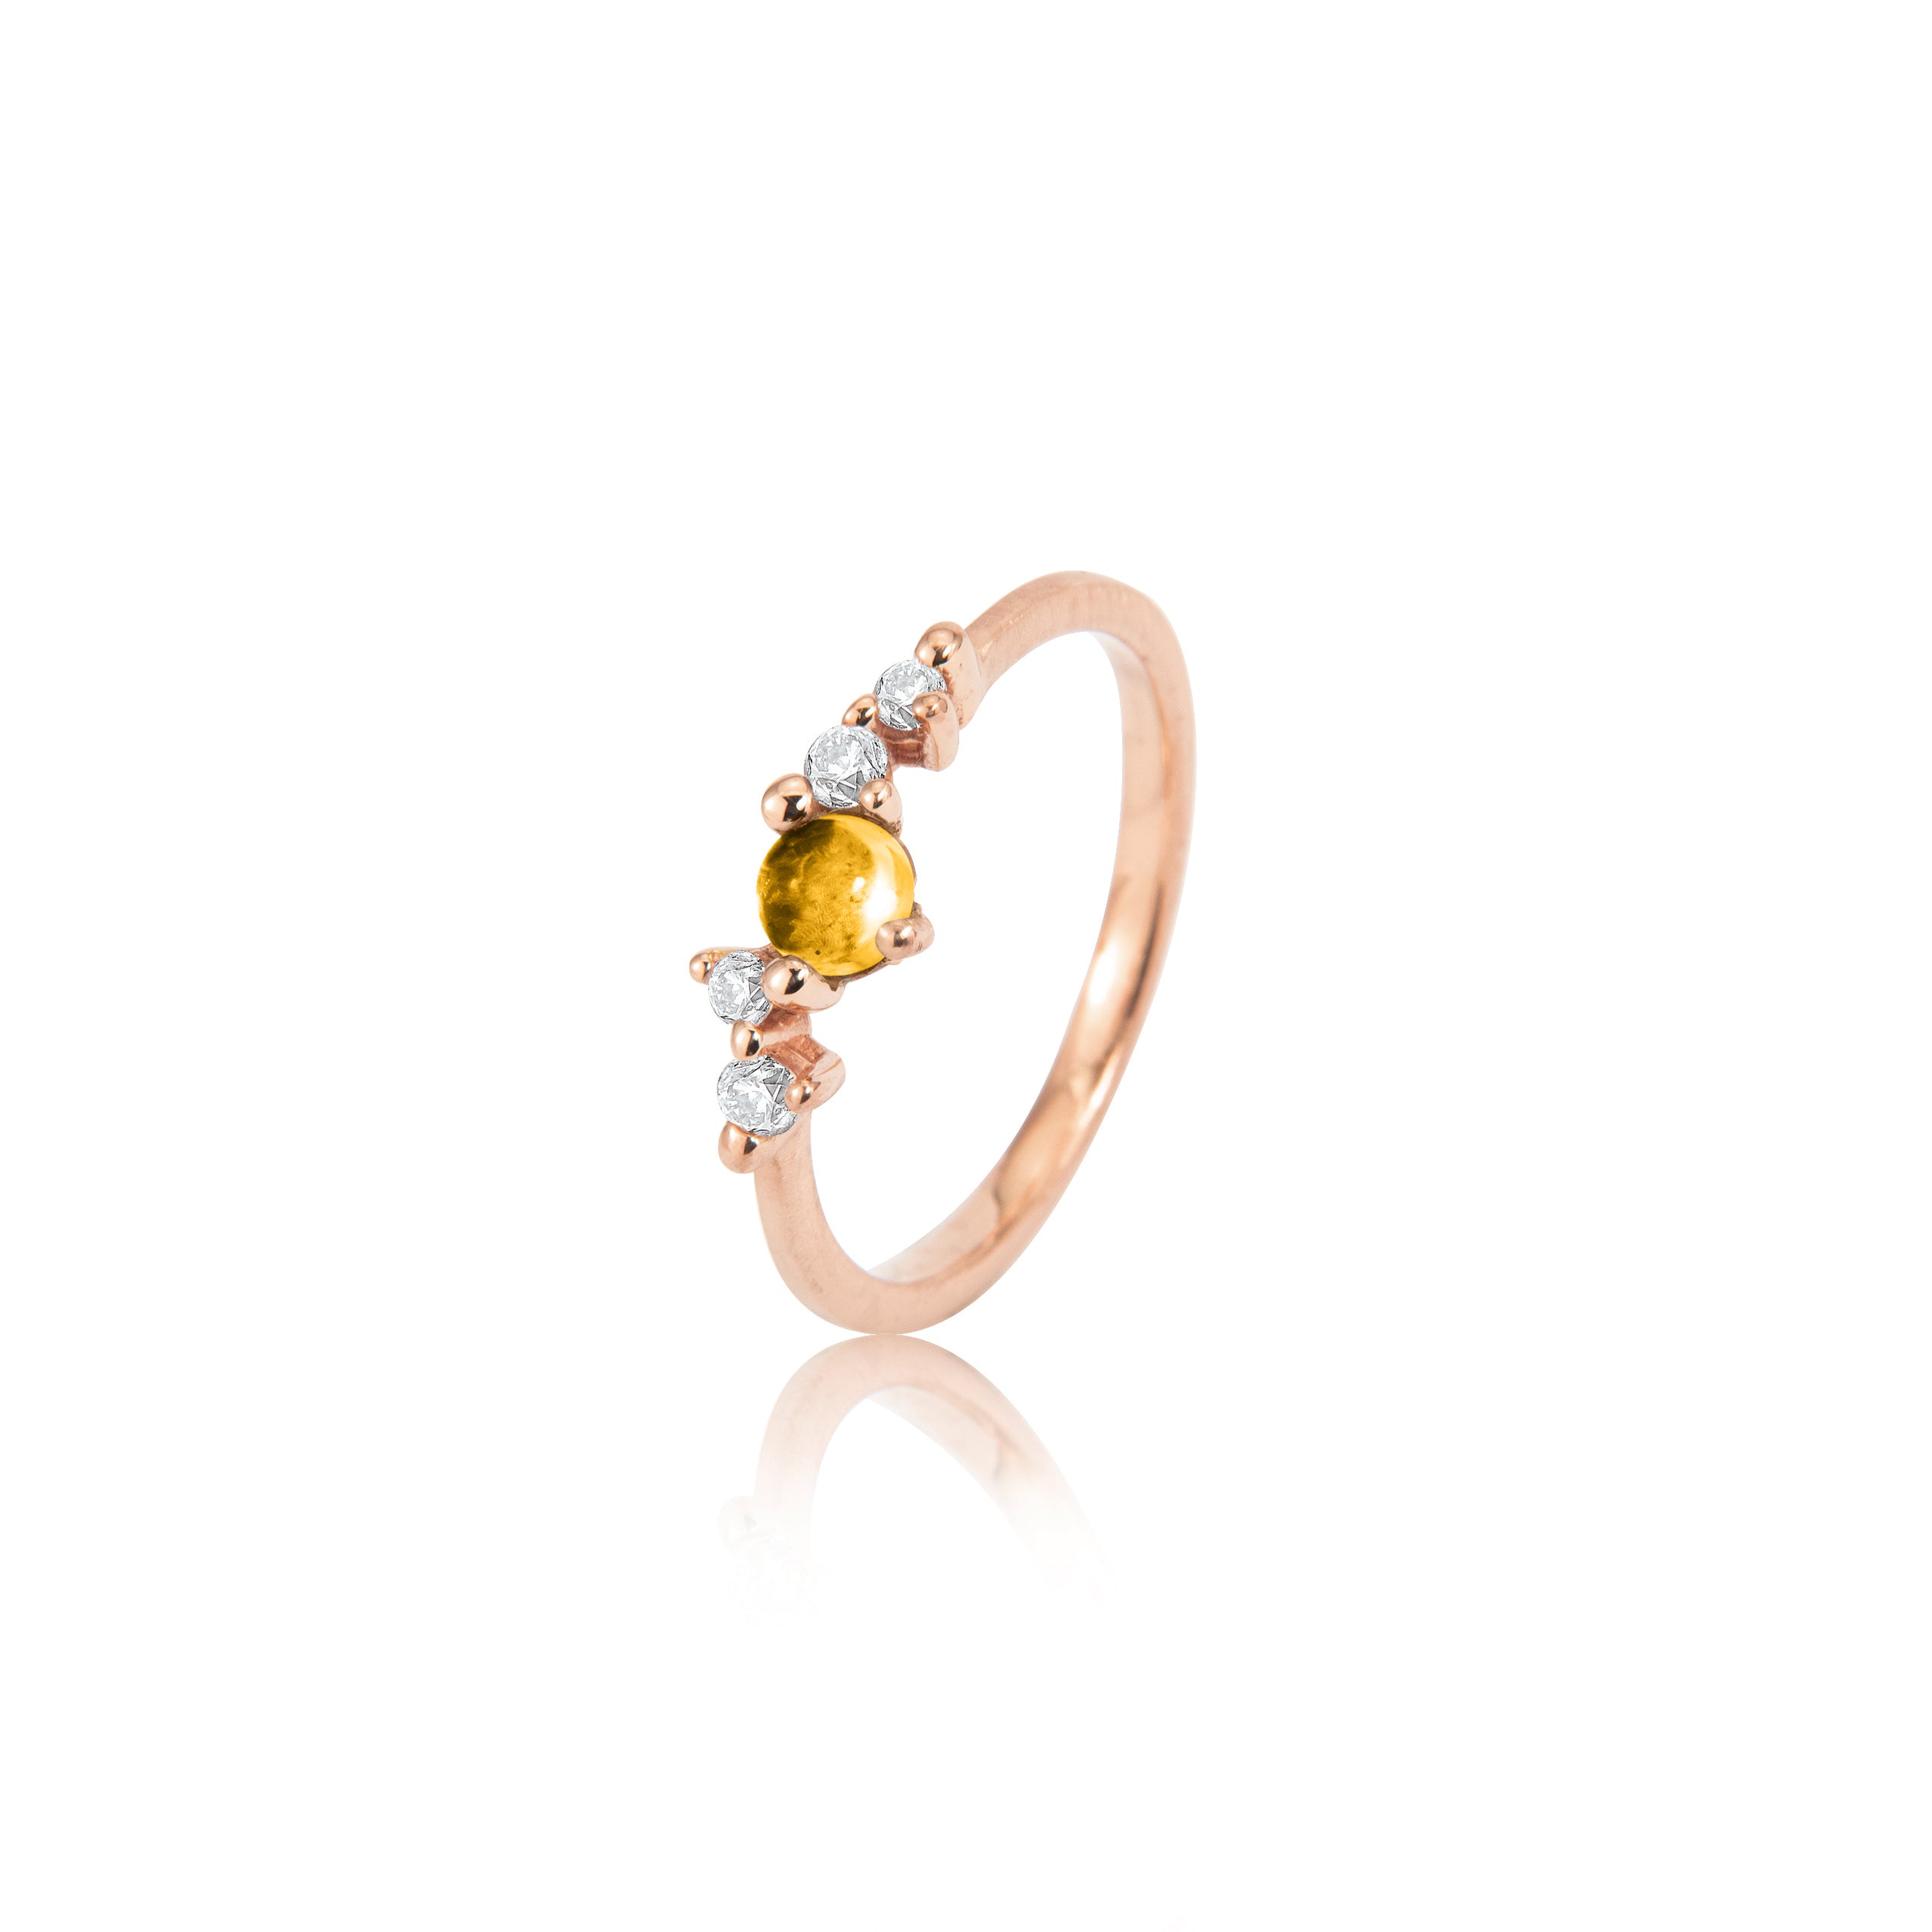 Stellini ring "smal" in 585 gold with citrine